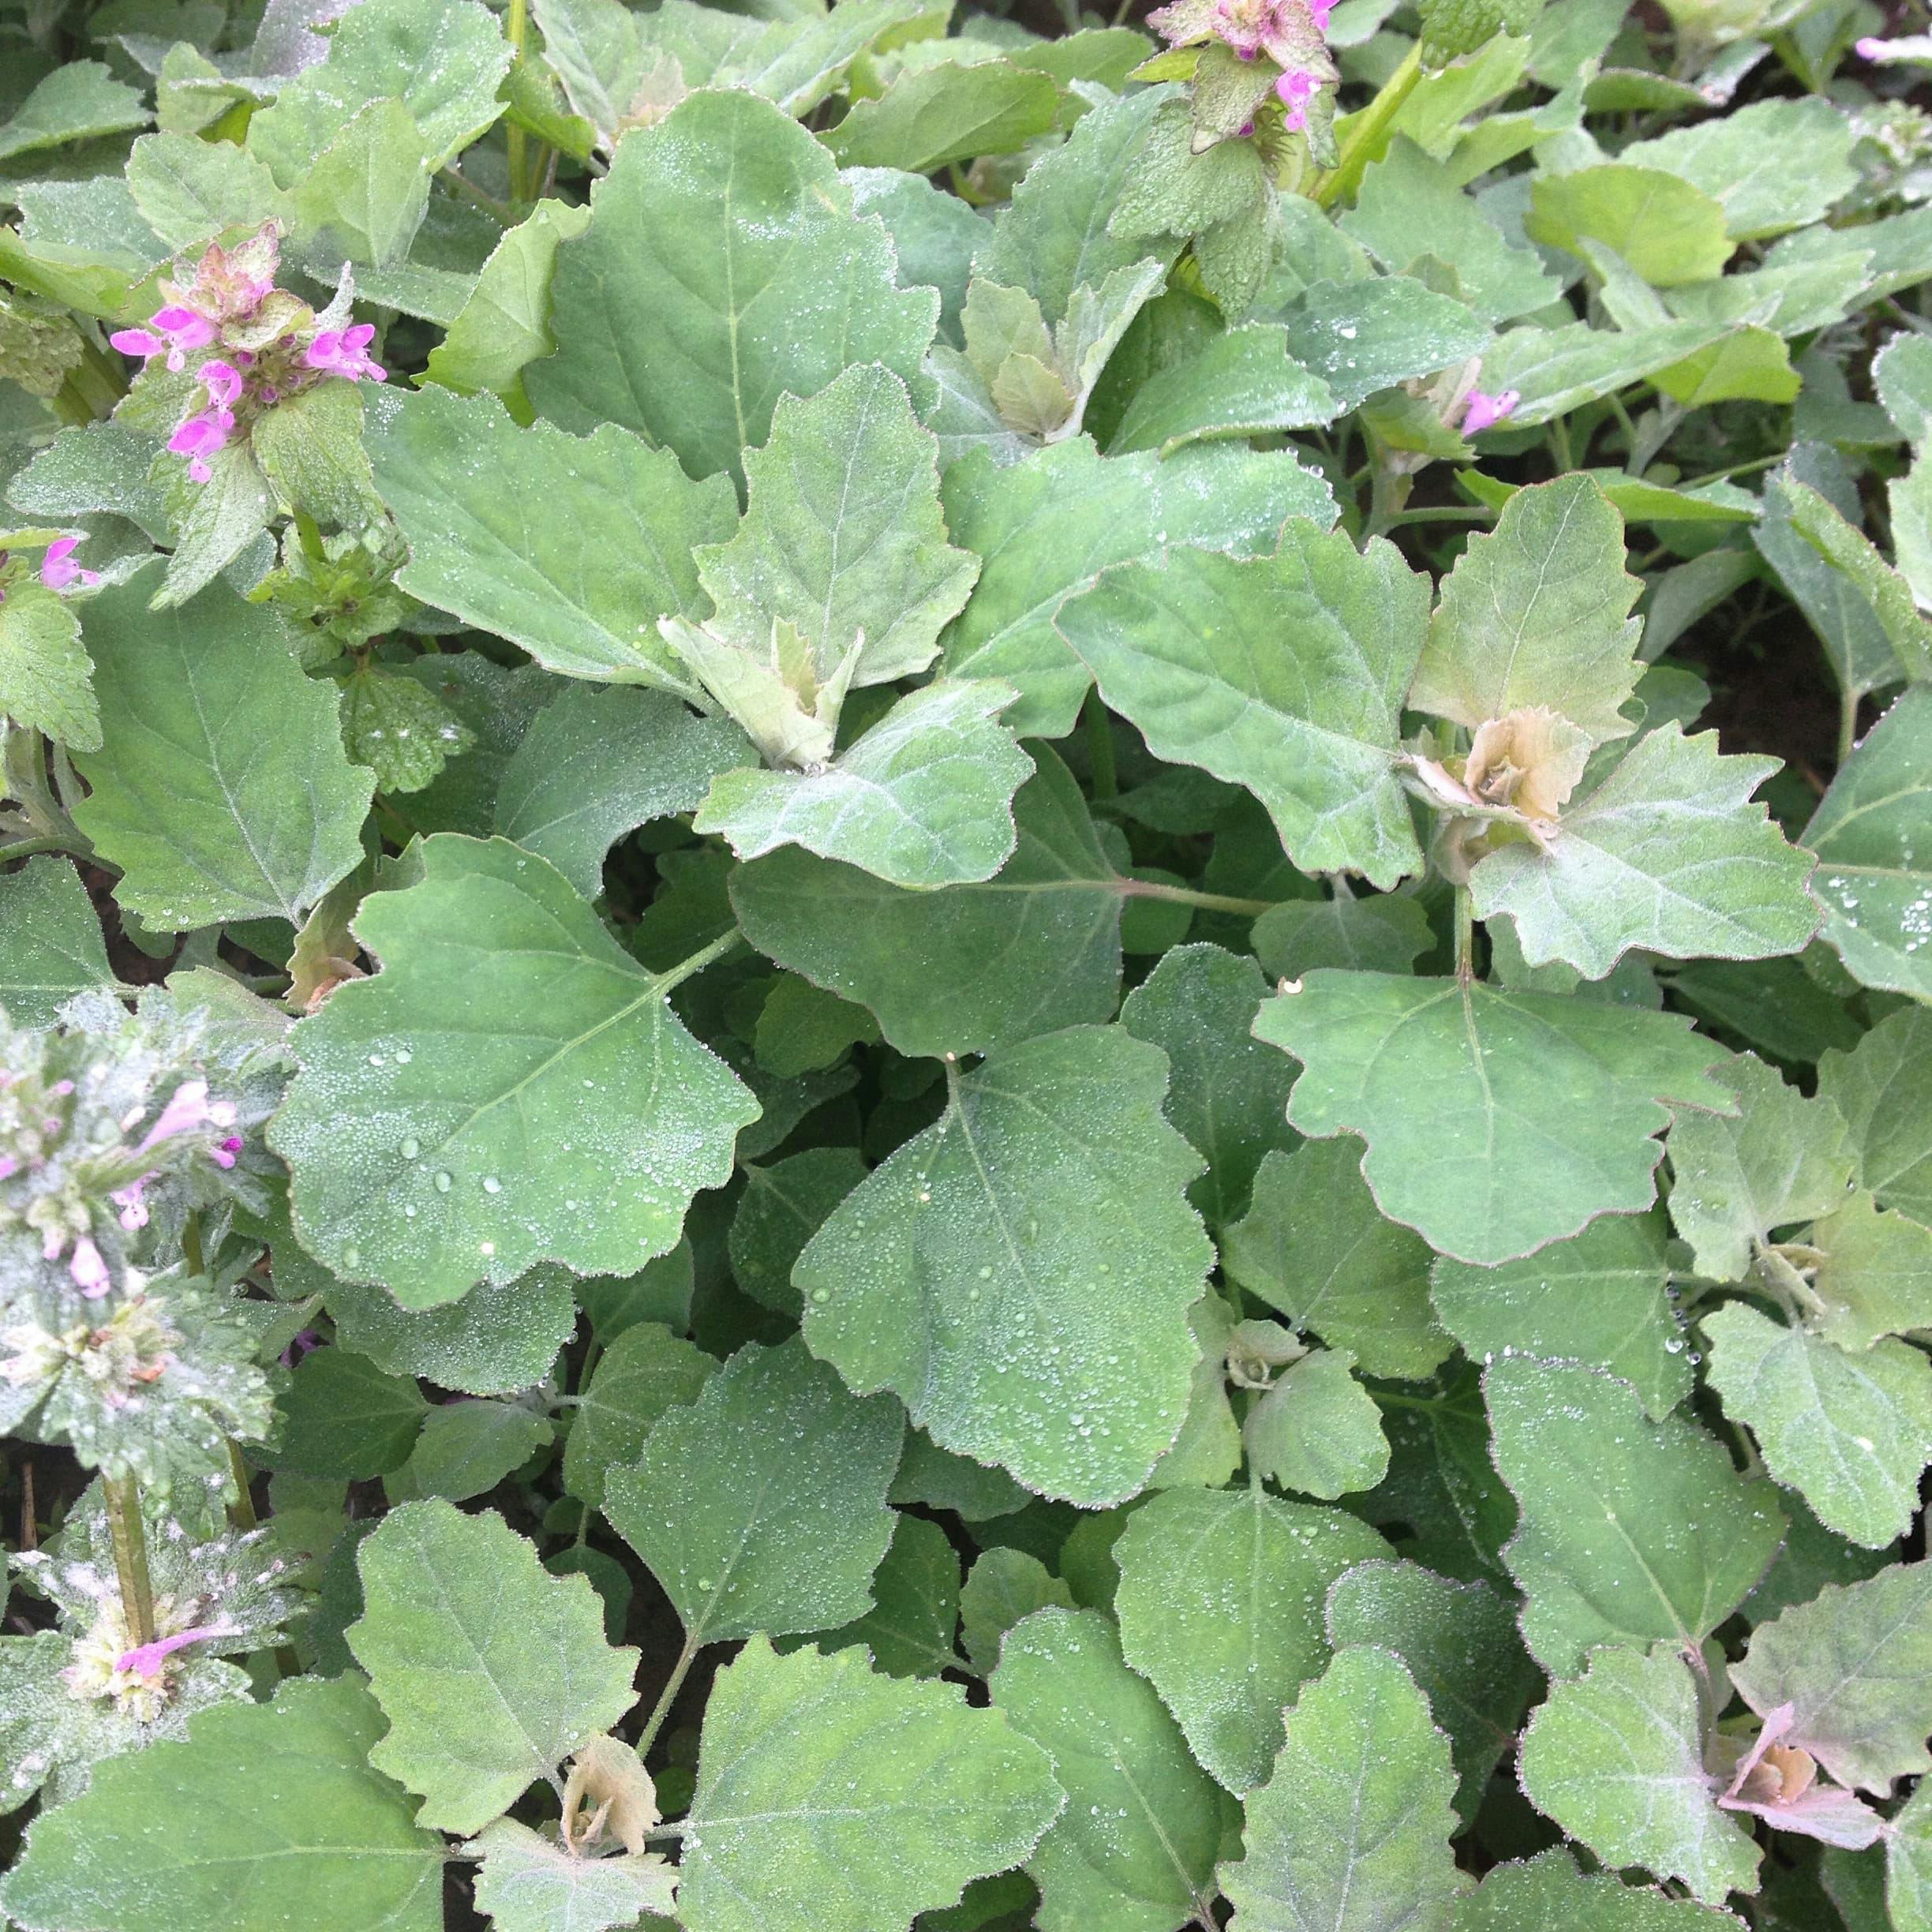 How to Identify Lambsquarters — Foraging for Edible Wild Spinach Greens